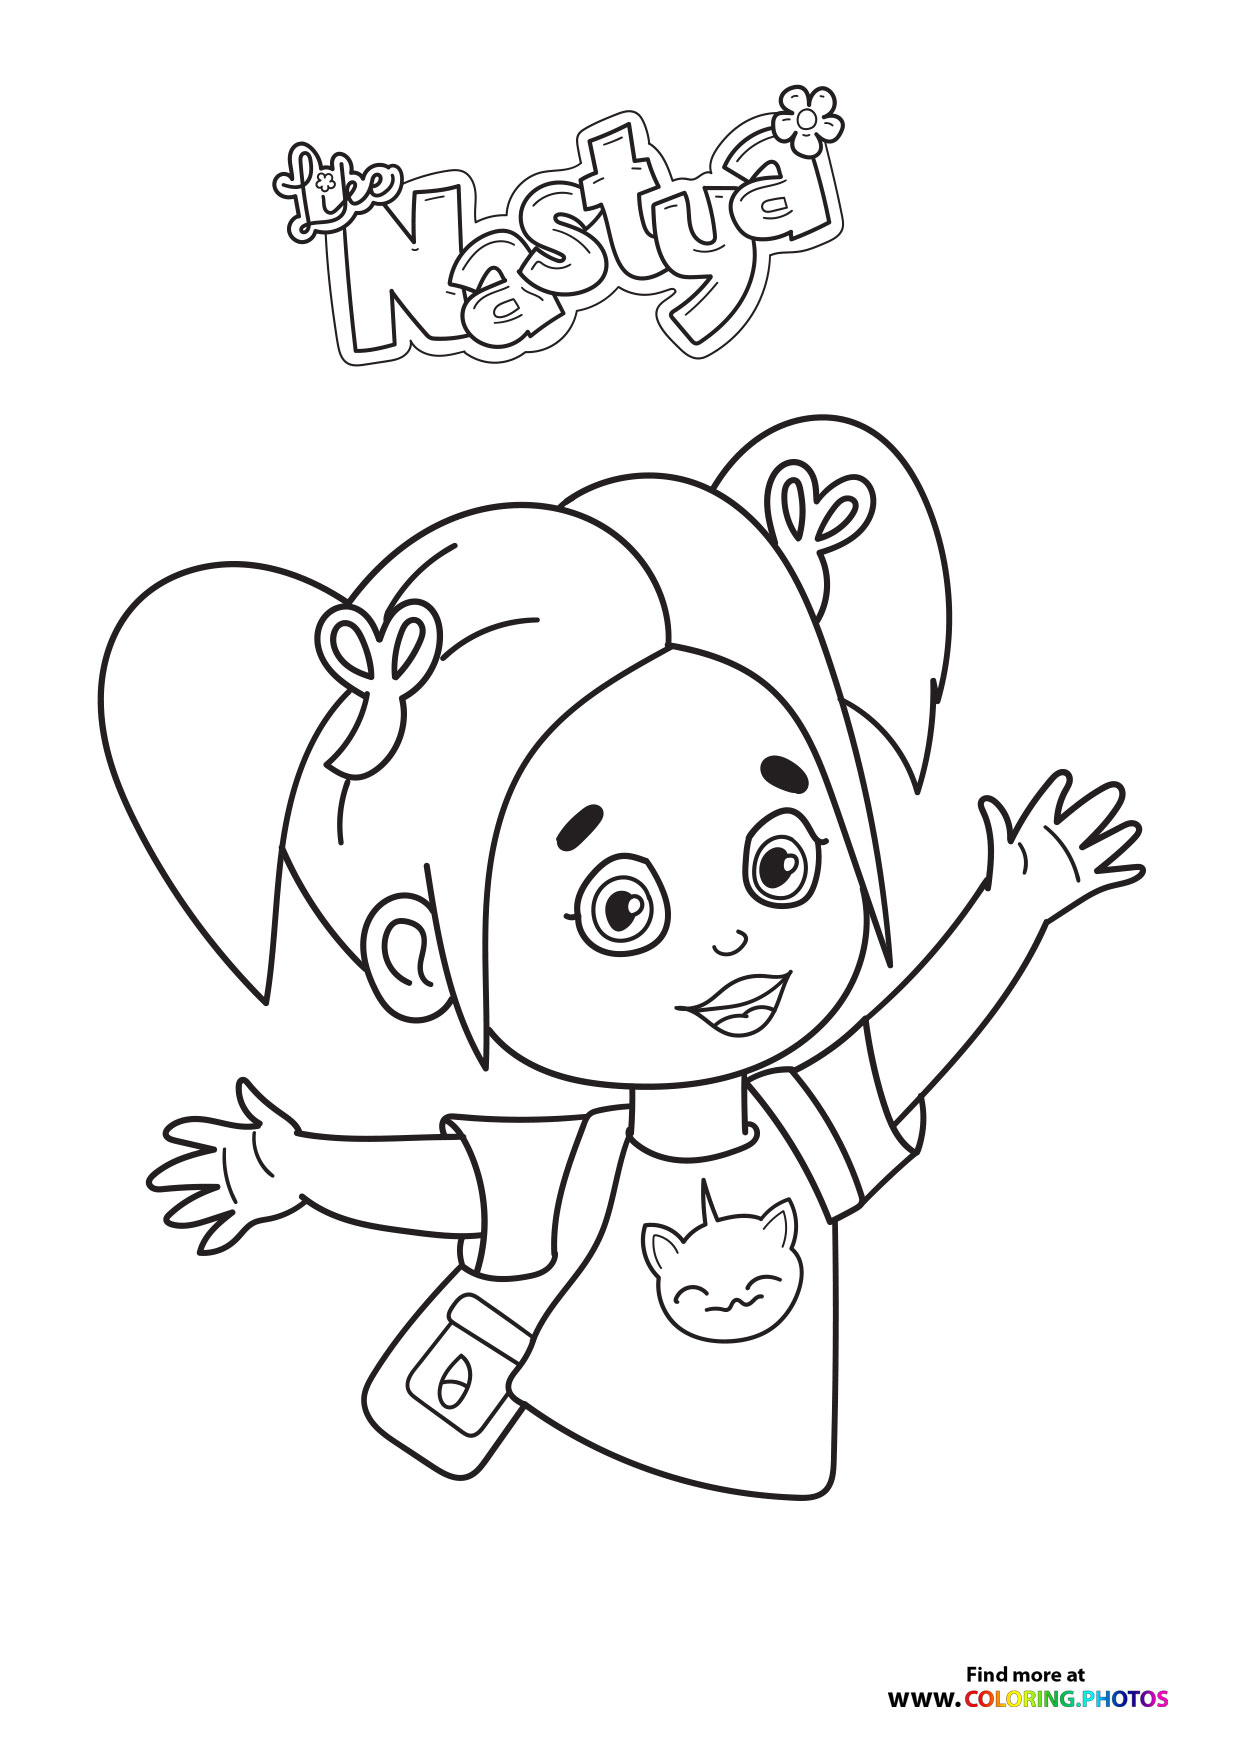 Like Nastya - Coloring Pages for kids | 100% free print or download